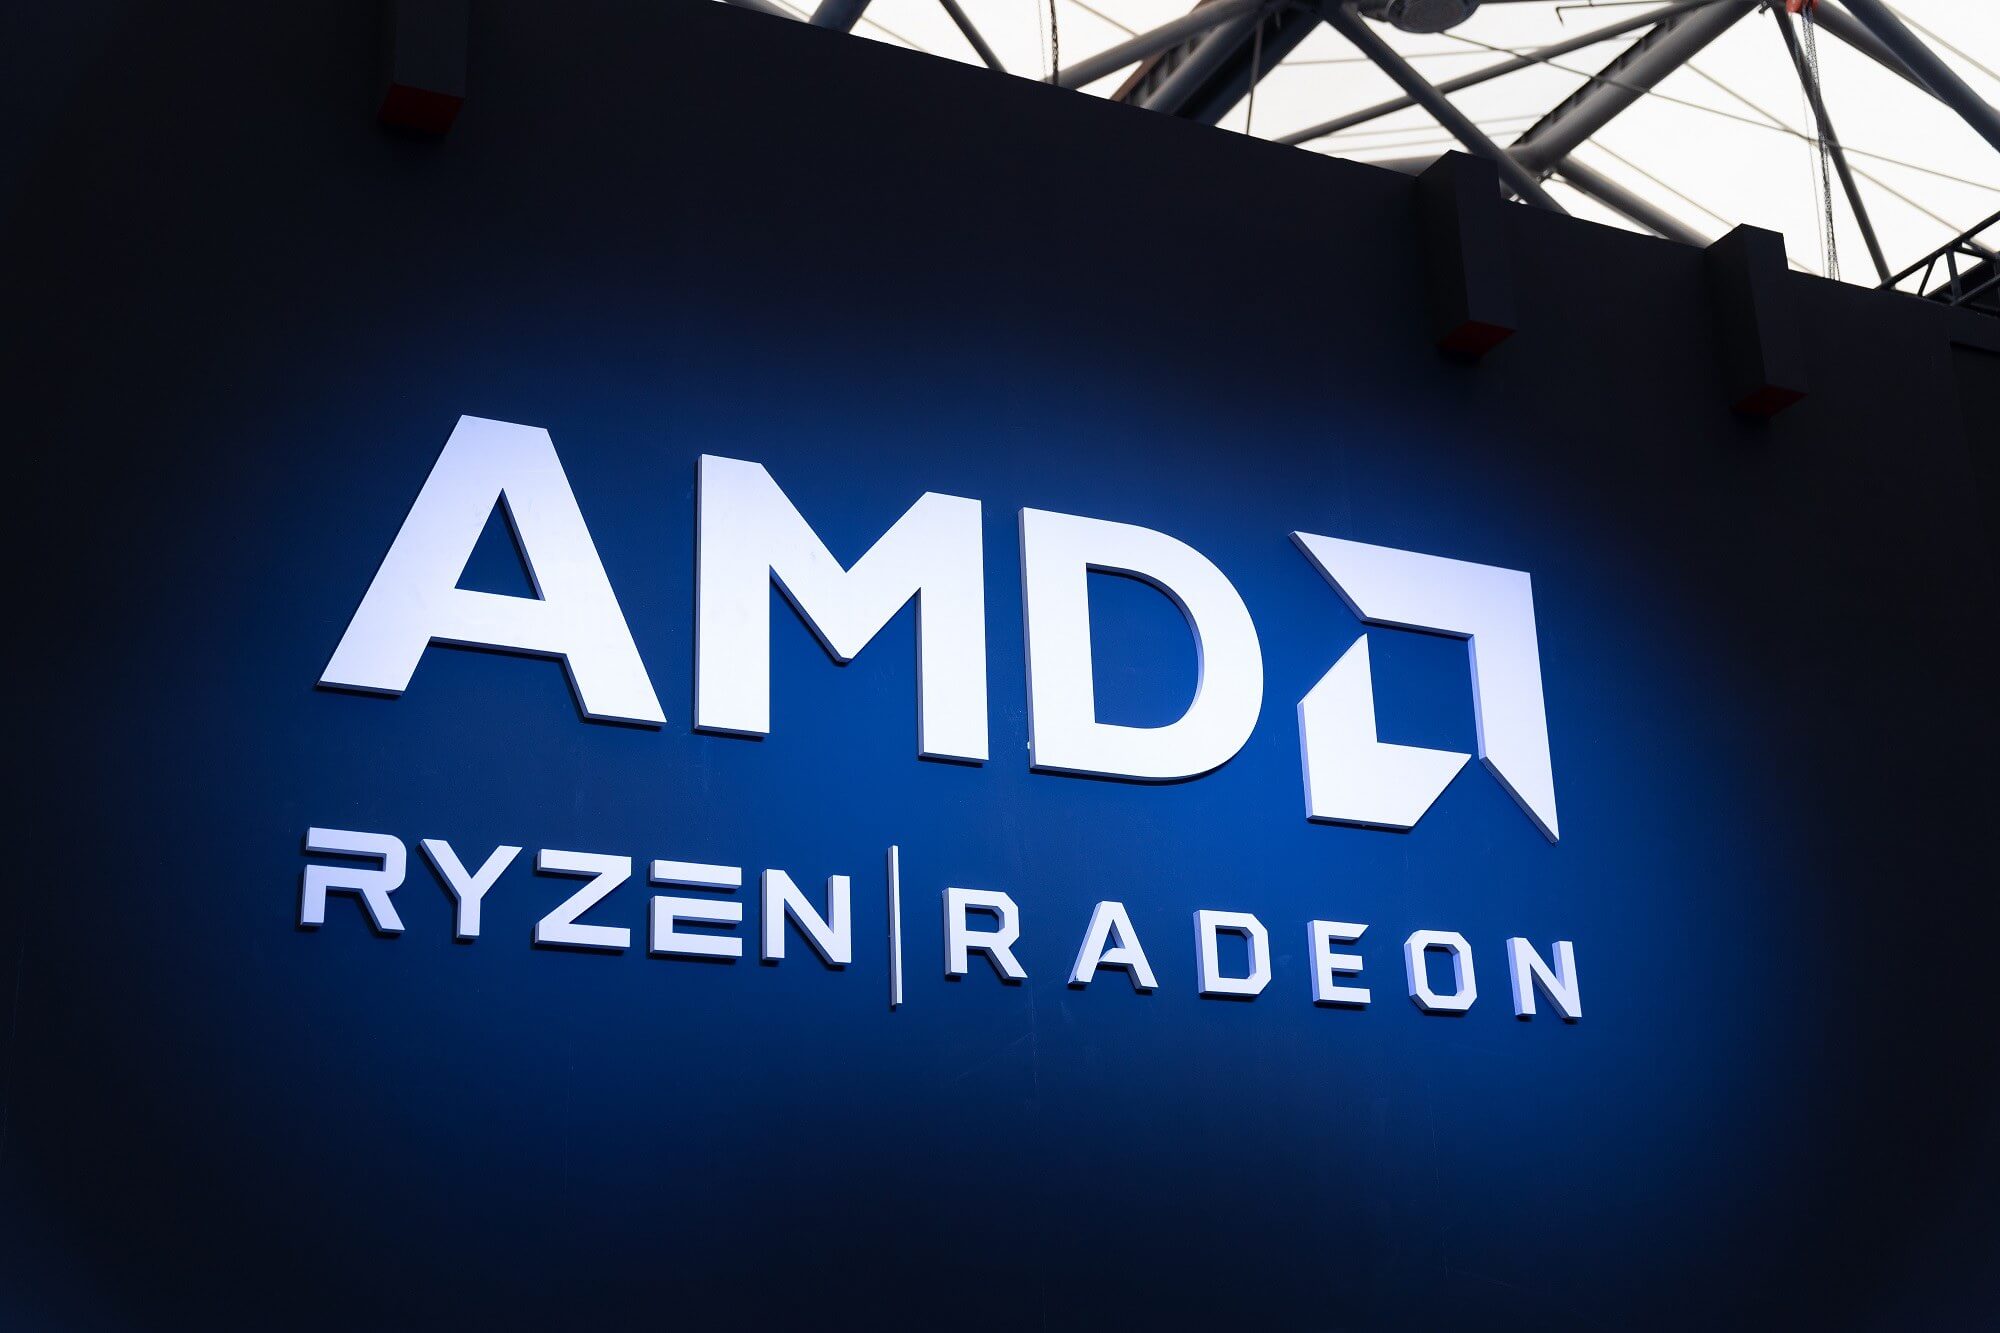 AMD's share price jumps above Intel's for first time since 2006